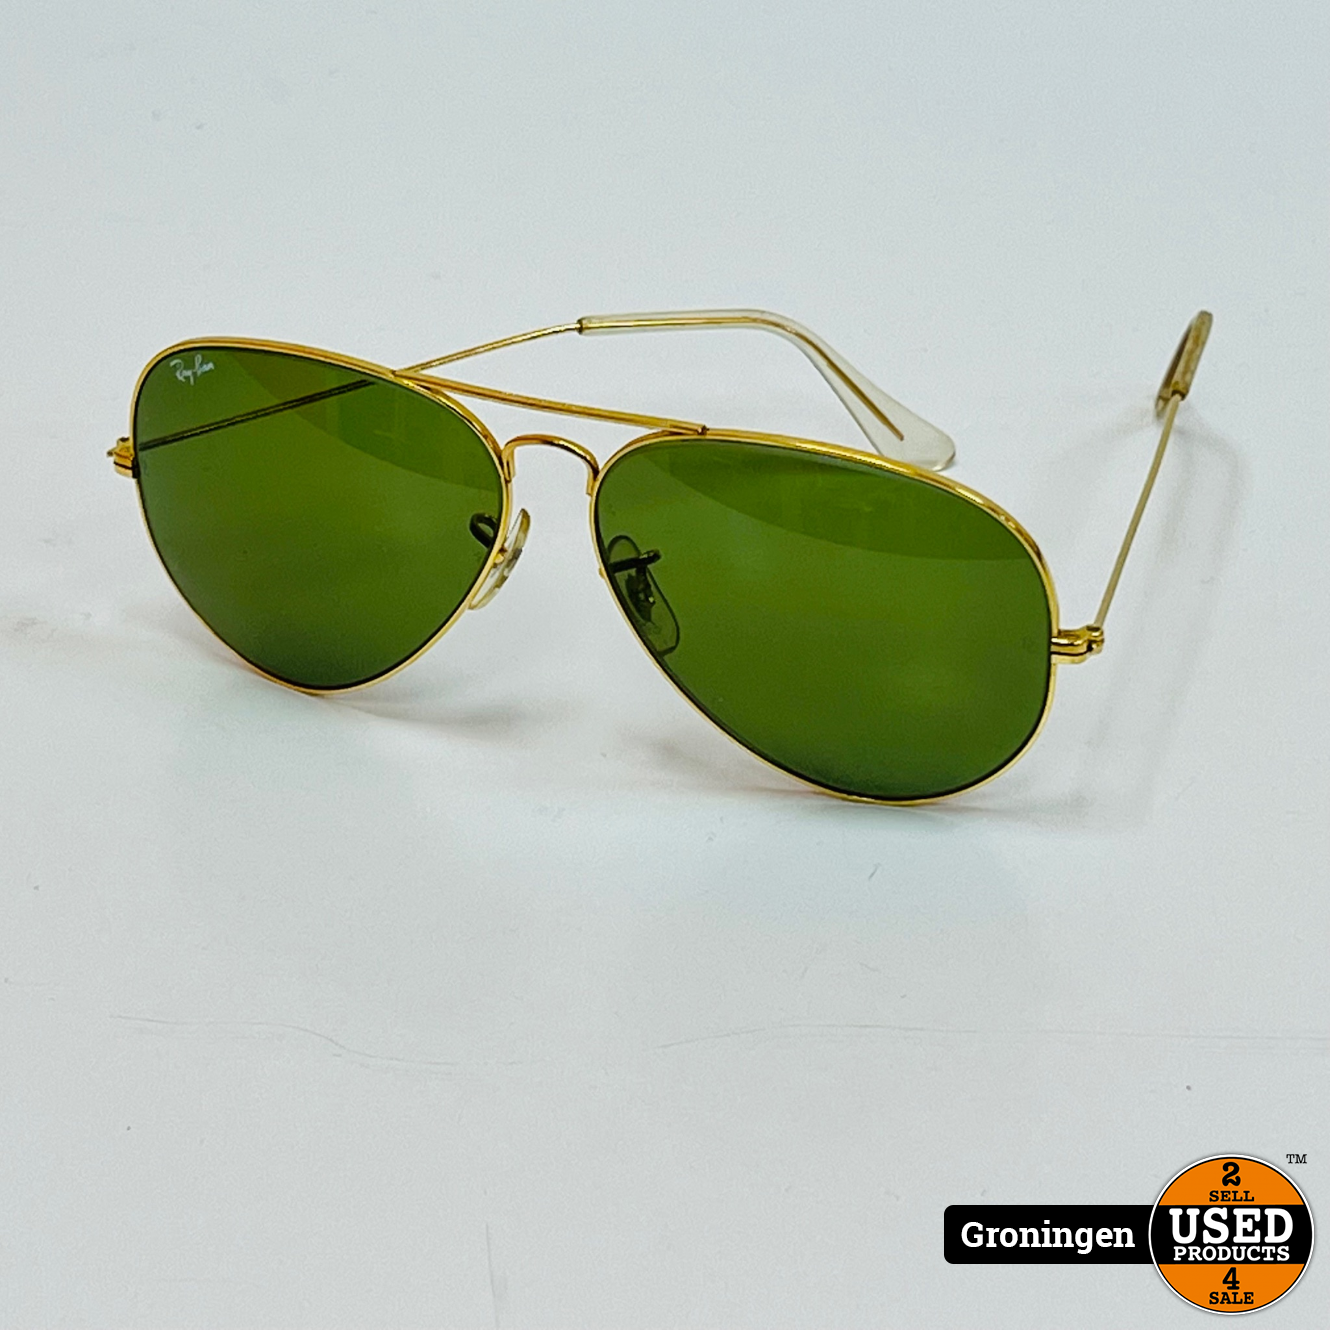 weduwe aansporing echo Ray-Ban Bausch & Lomb USA 62-14 Vintage zonnebril - Used Products Groningen